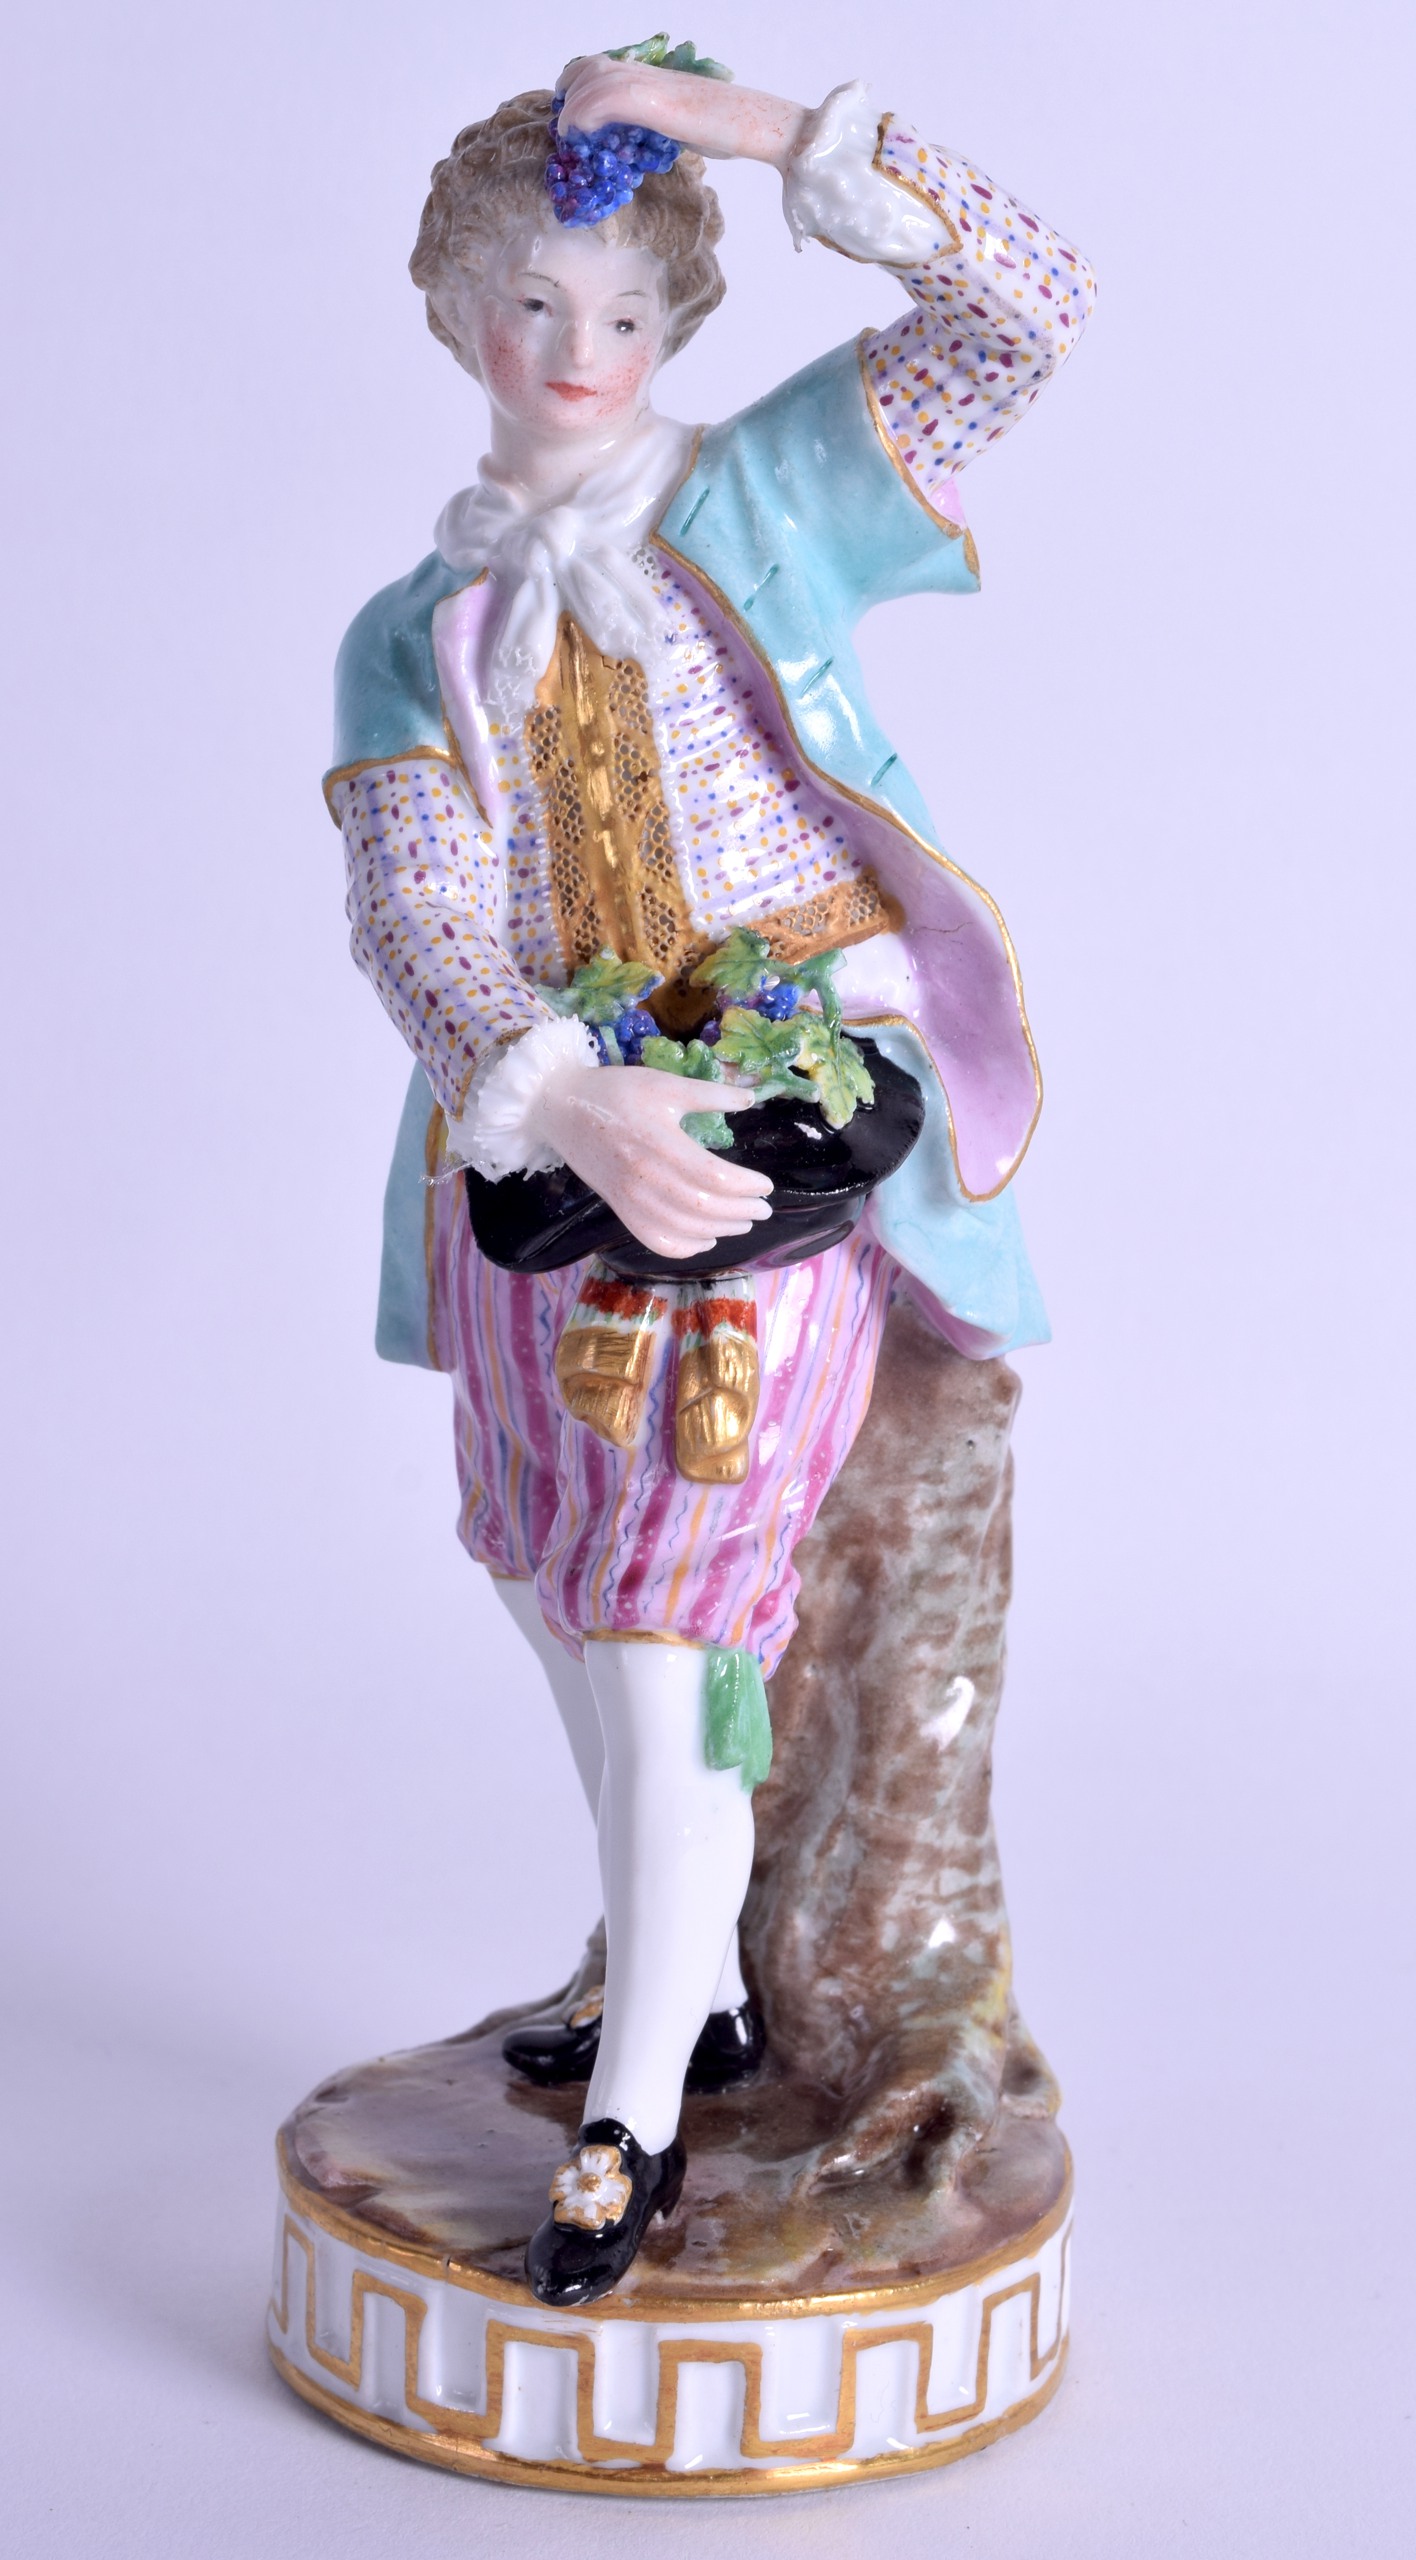 19th c. Meissen figure of a boy holding grapes in his hand and hat wearing striped pantaloons